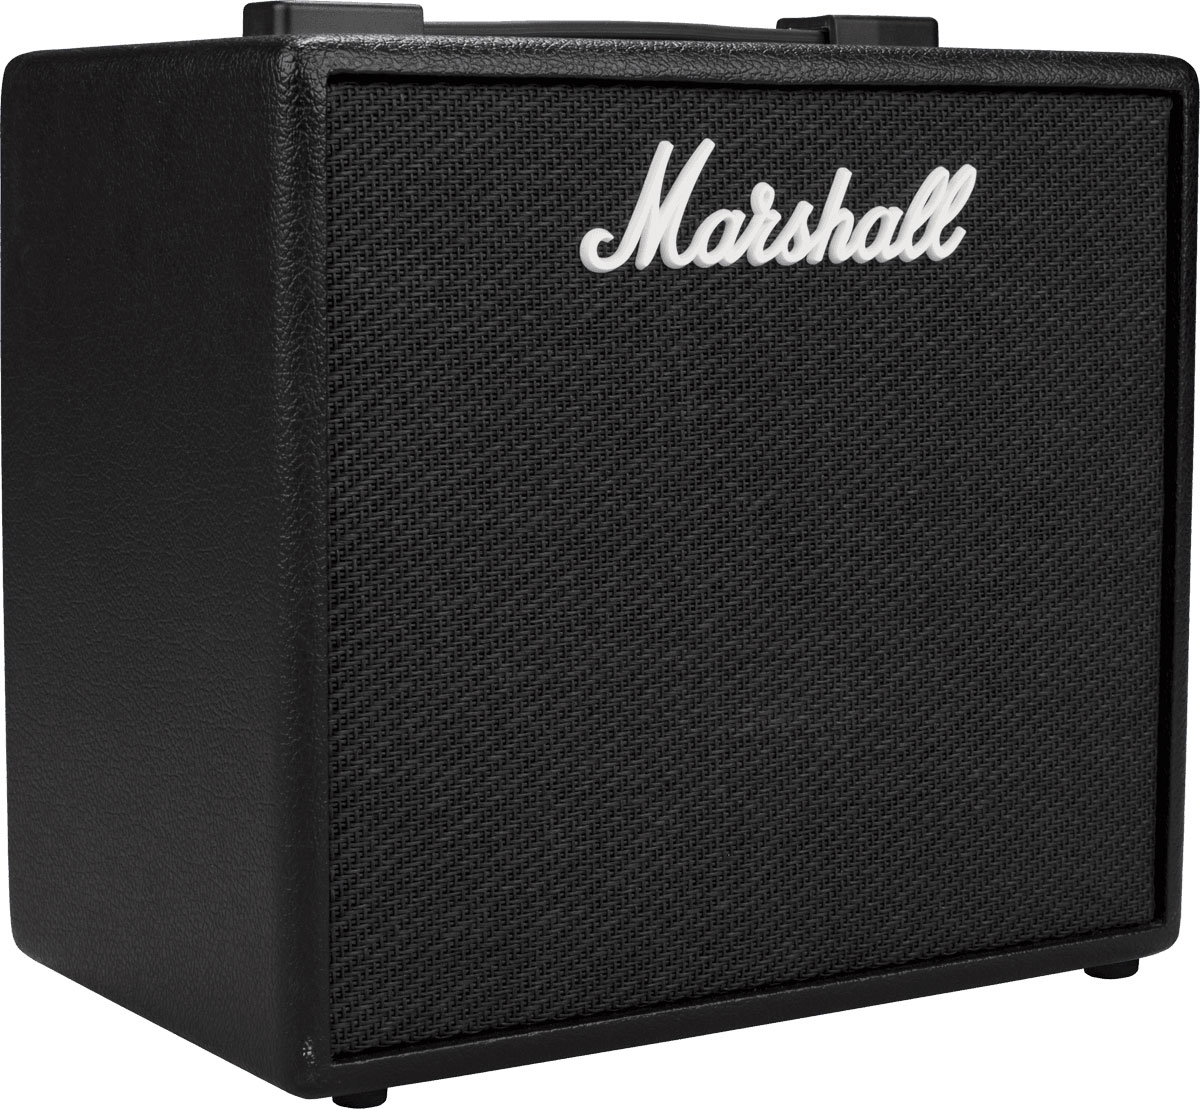 MARSHALL CODE 25 - RECONDITIONNE